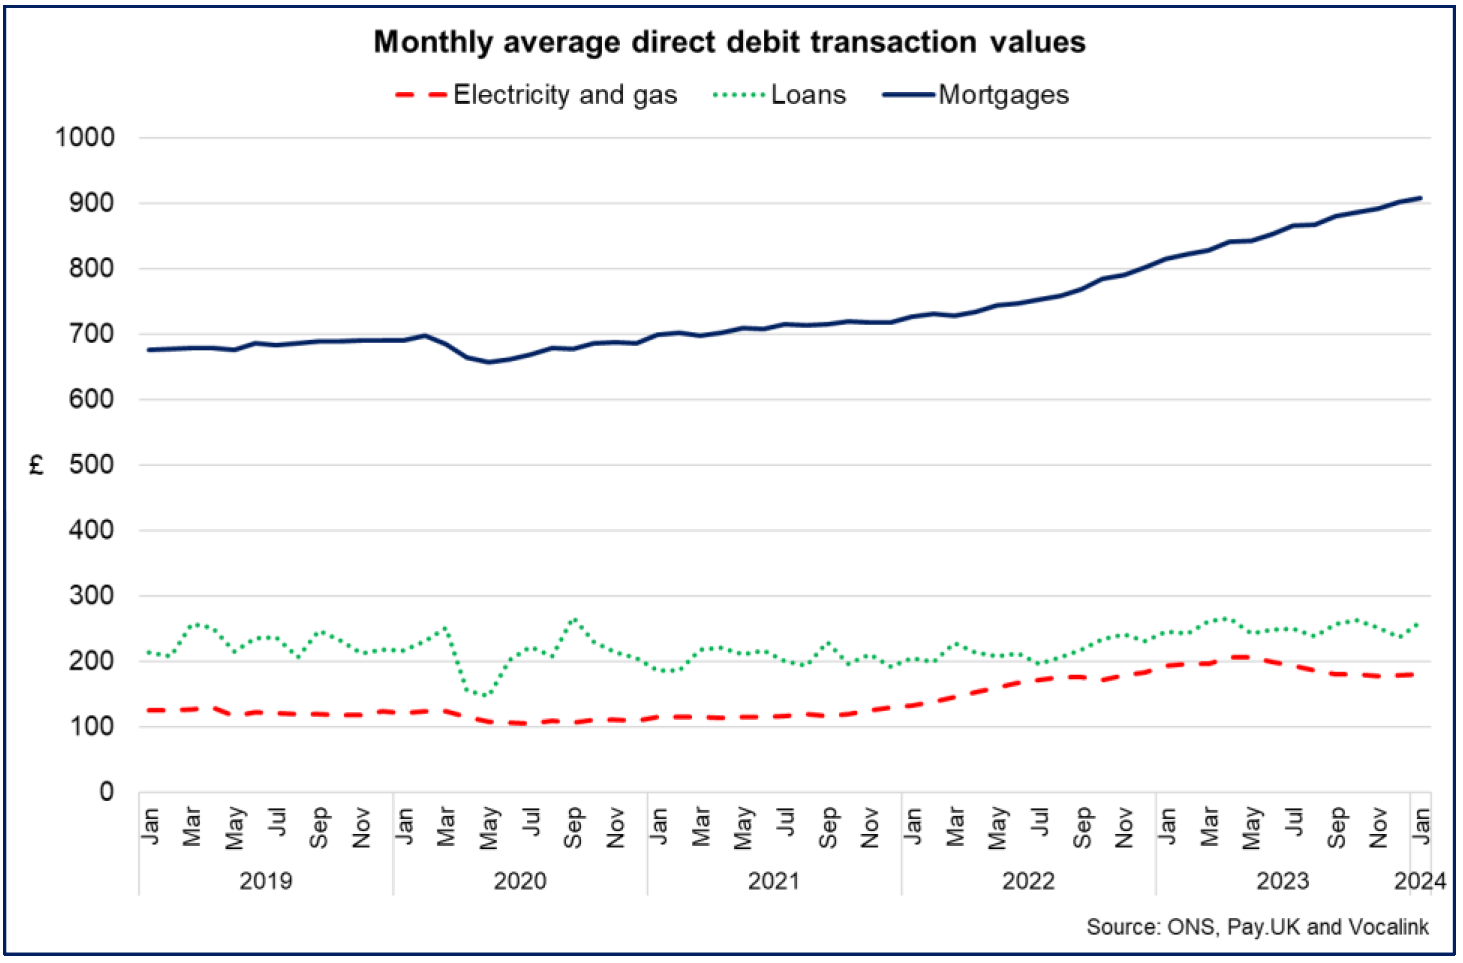 average direct debit transaction value for energy costs has fallen over the past year while mortgages and other loans transaction values have risen